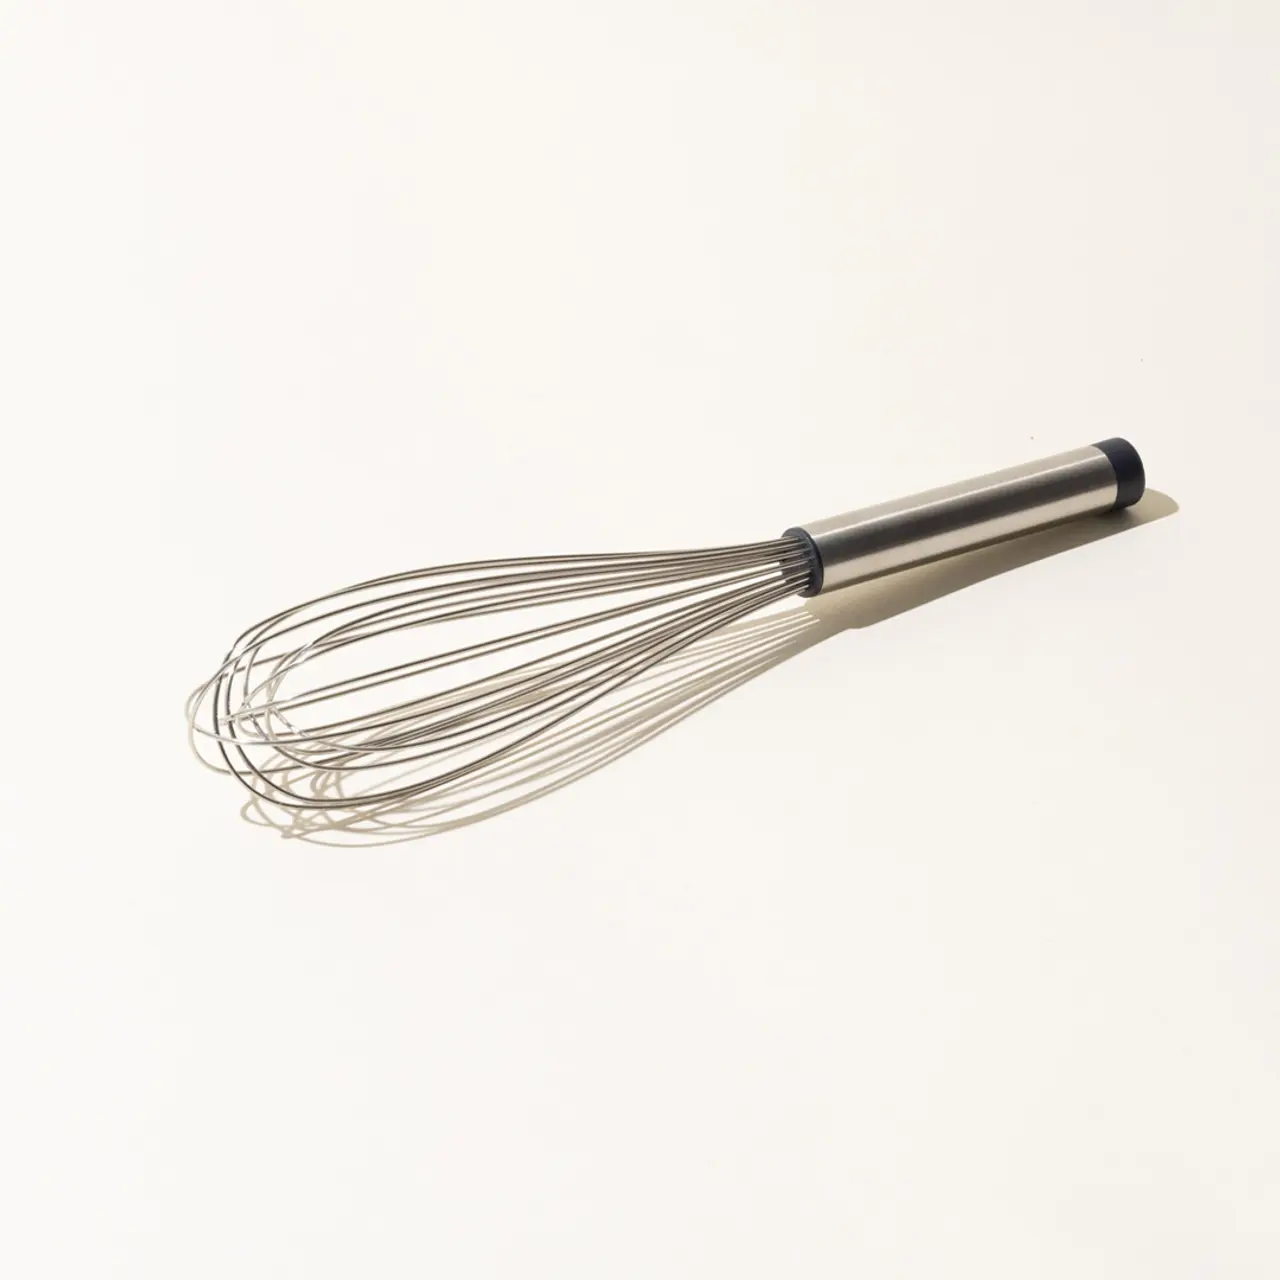 A stainless steel kitchen whisk with a black handle on a plain white background.